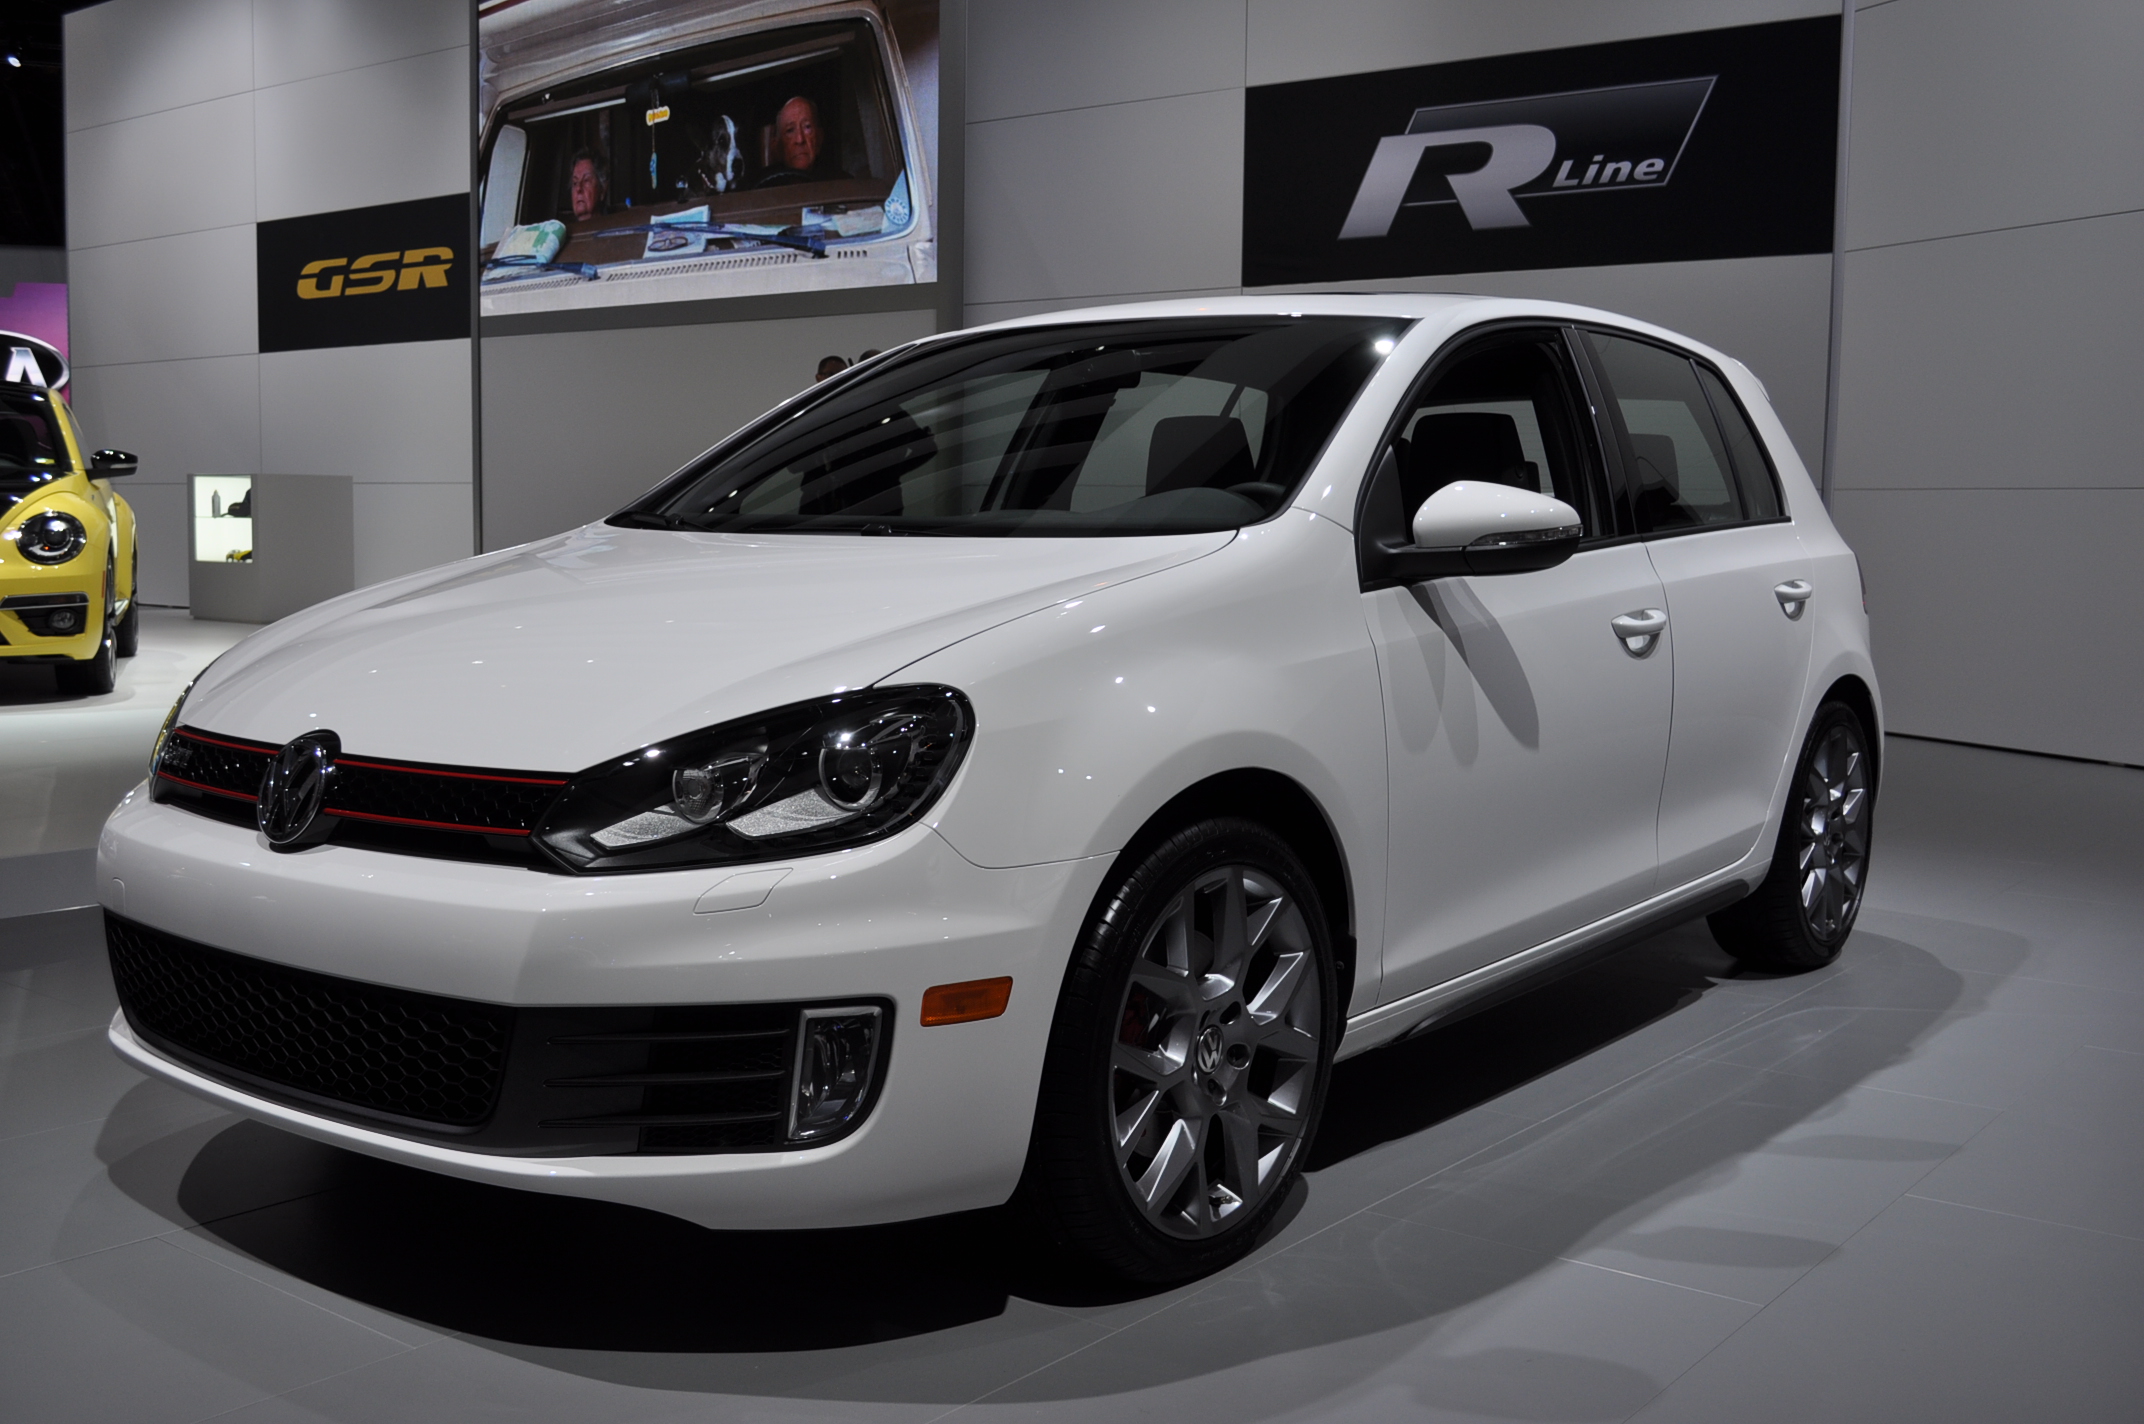 Volkswagen Debuts Limited Edition GTI Models In Chicago